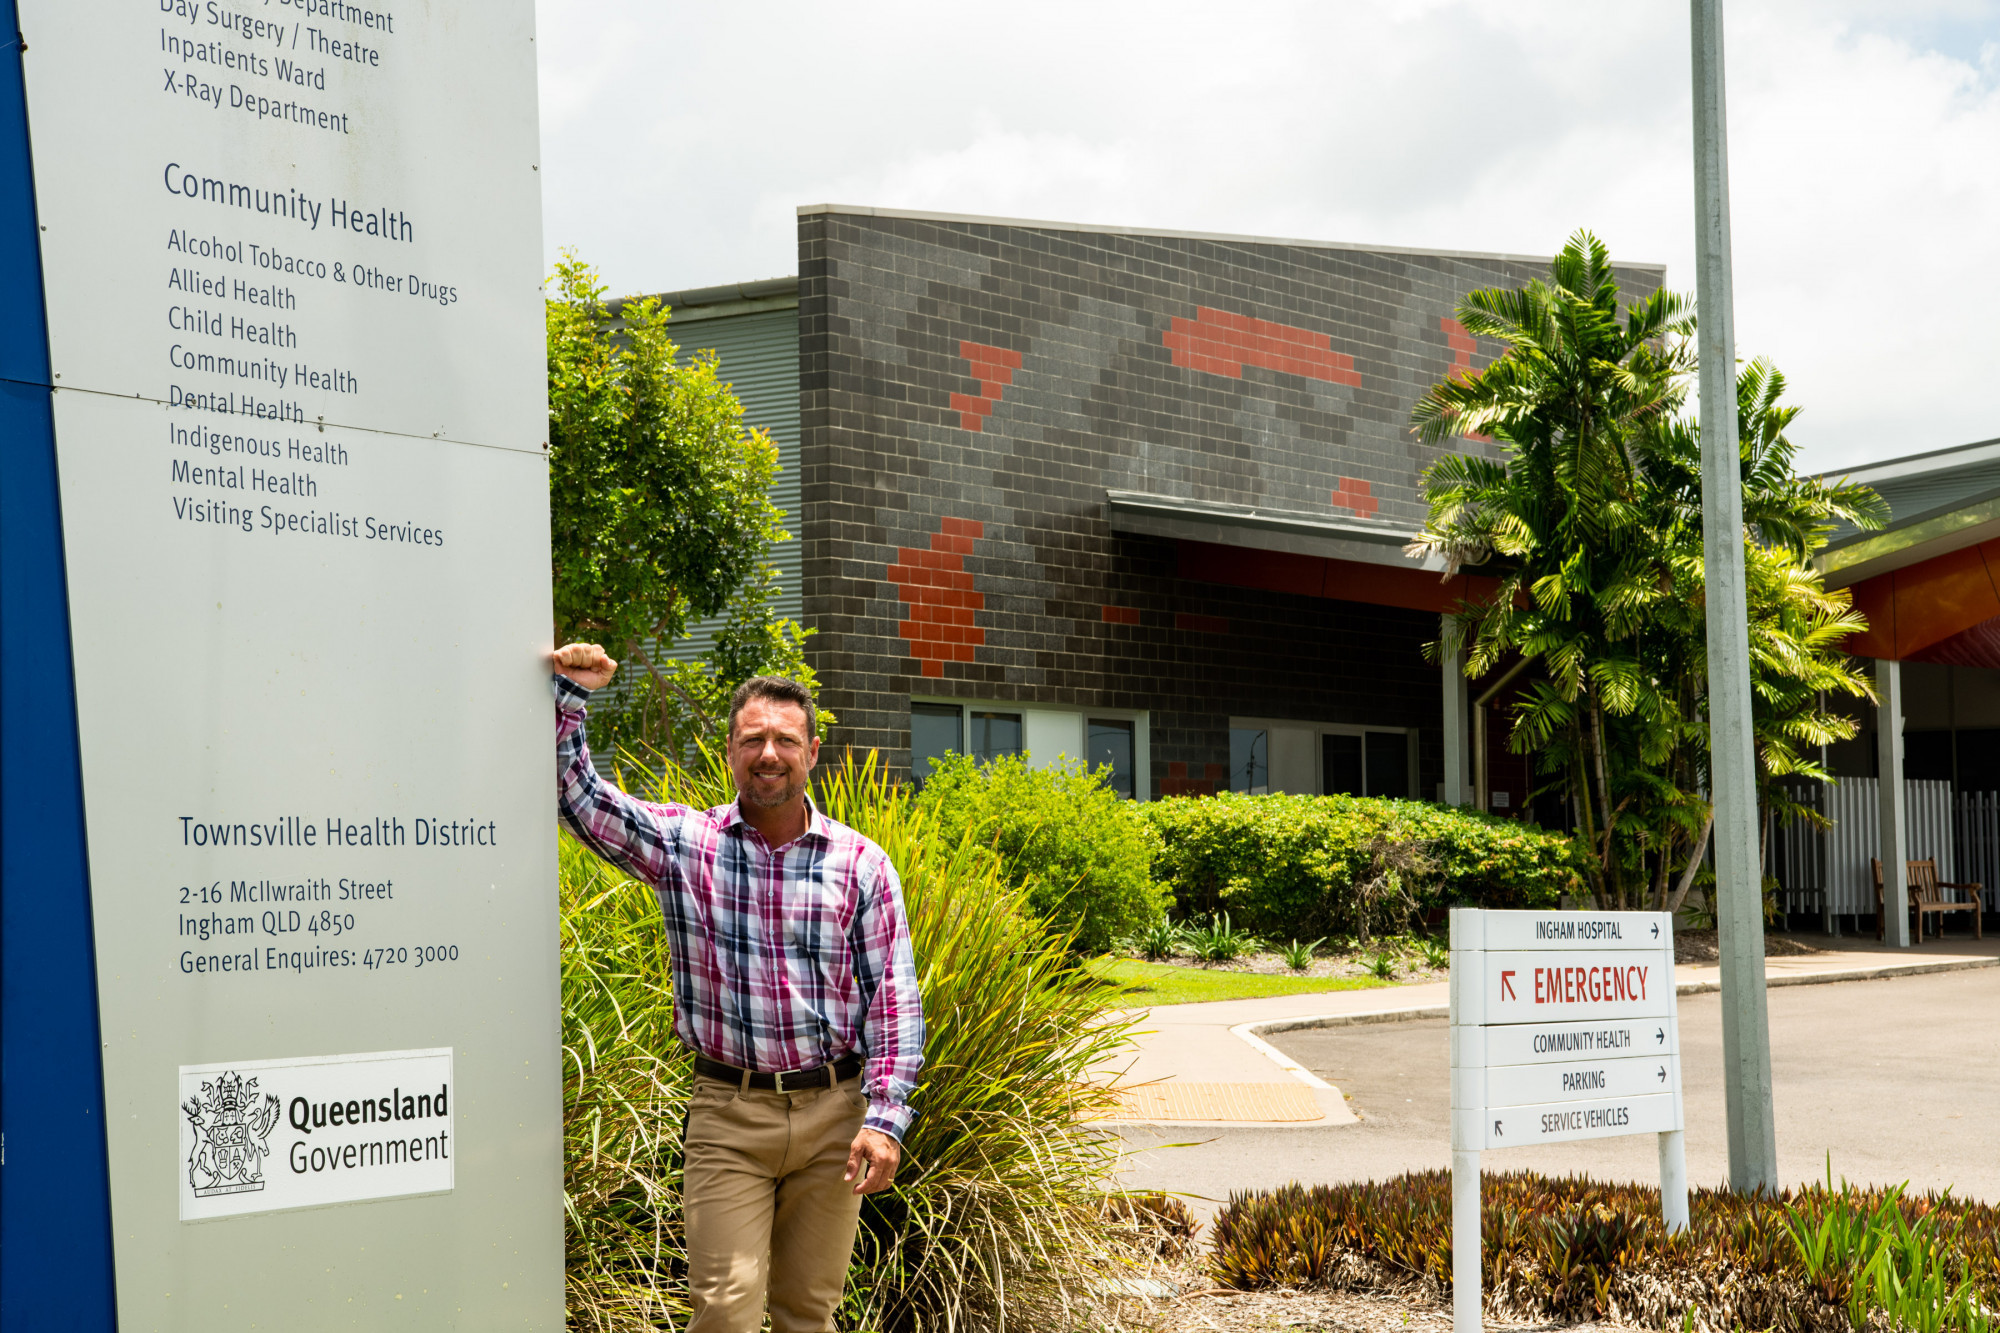 GO FOR GROWTH: Hinchinbrook MP Nick Dametto has continued to lobby strongly for better services at Ingham Hospital.